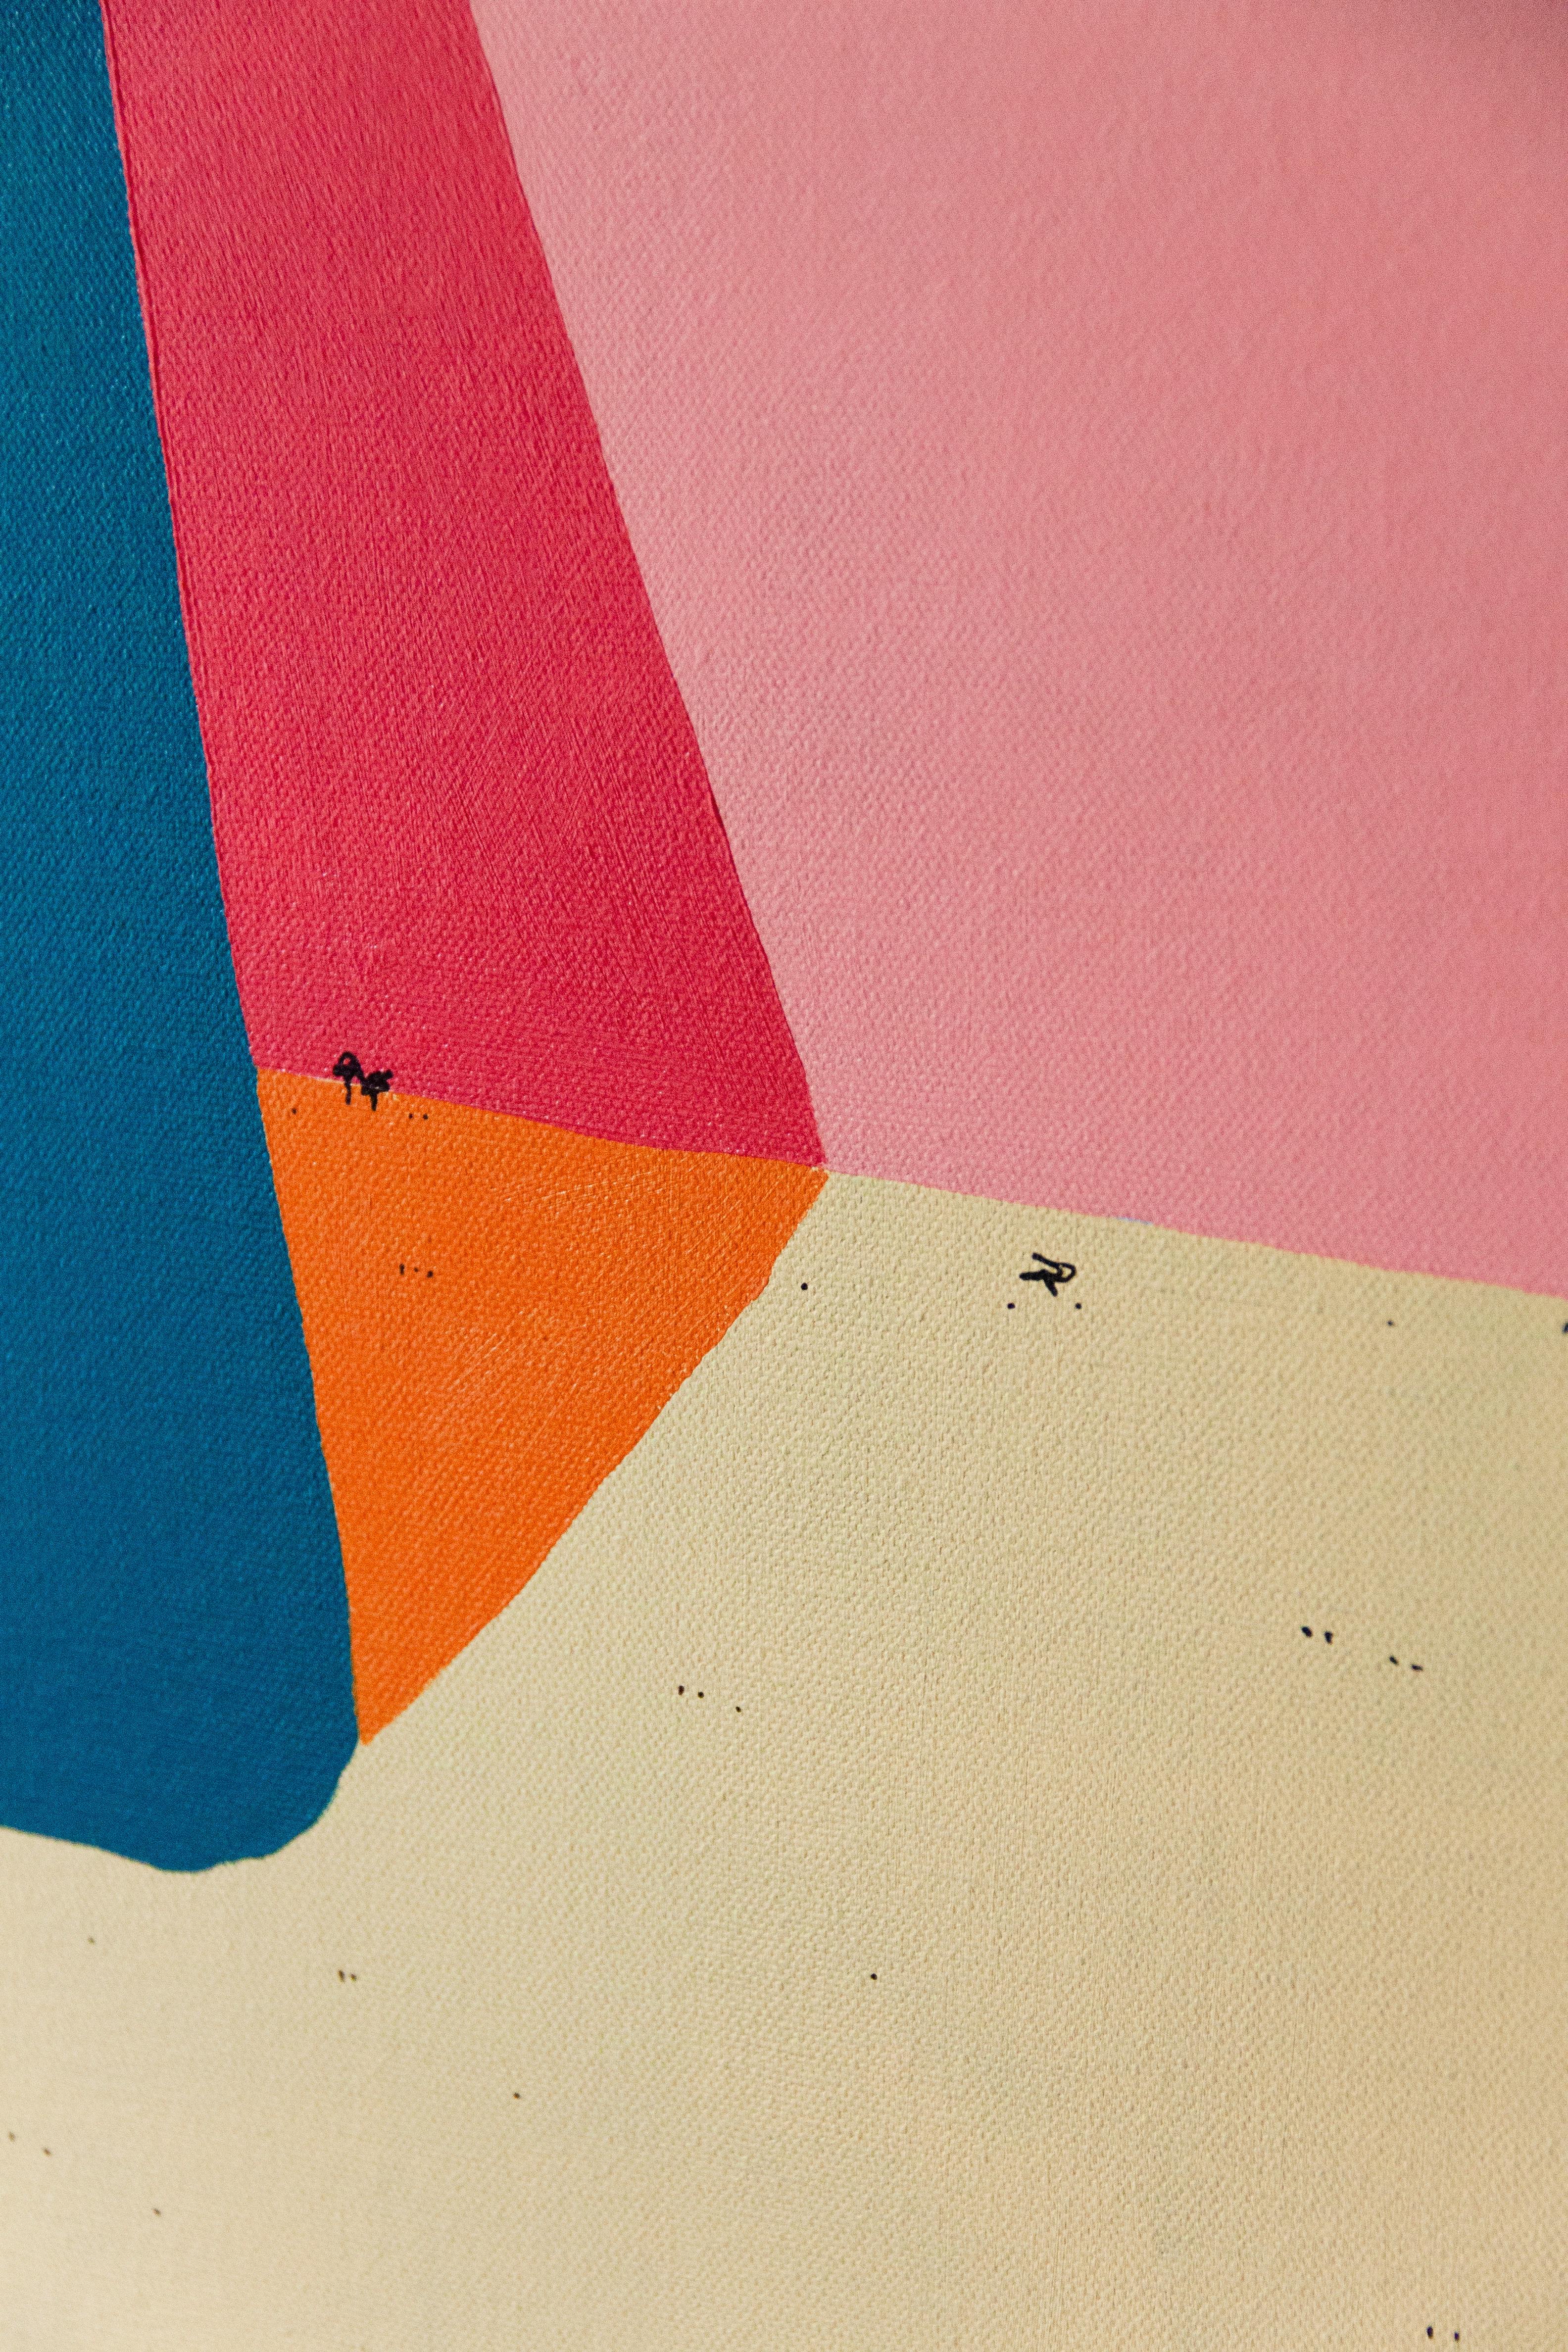 Detail of an abstract landscape painting by David Esquivel for exhibition Universe, Understood.